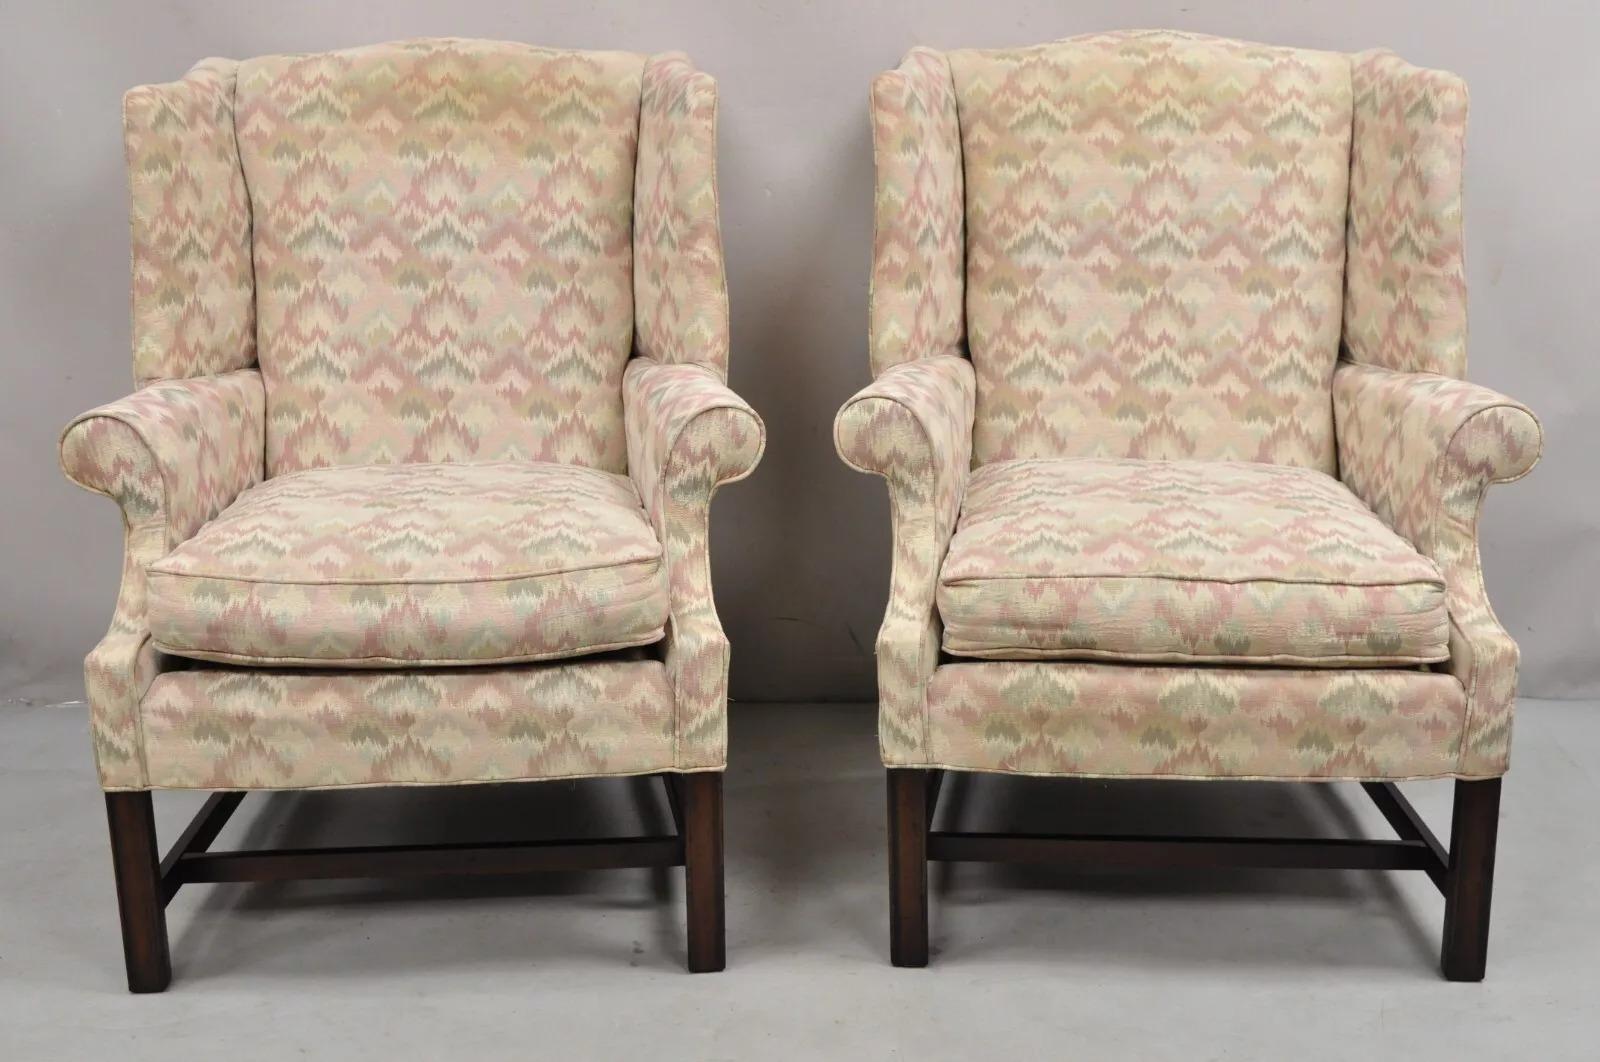 Vintage Frederick Edward Georgian Style Wingback Lounge Arm Chairs with Cherry Wood Legs - a Pair. Made in America with Pink, Green, and Beige Upholstery. Circa Late 20th Century. Measurements: 41